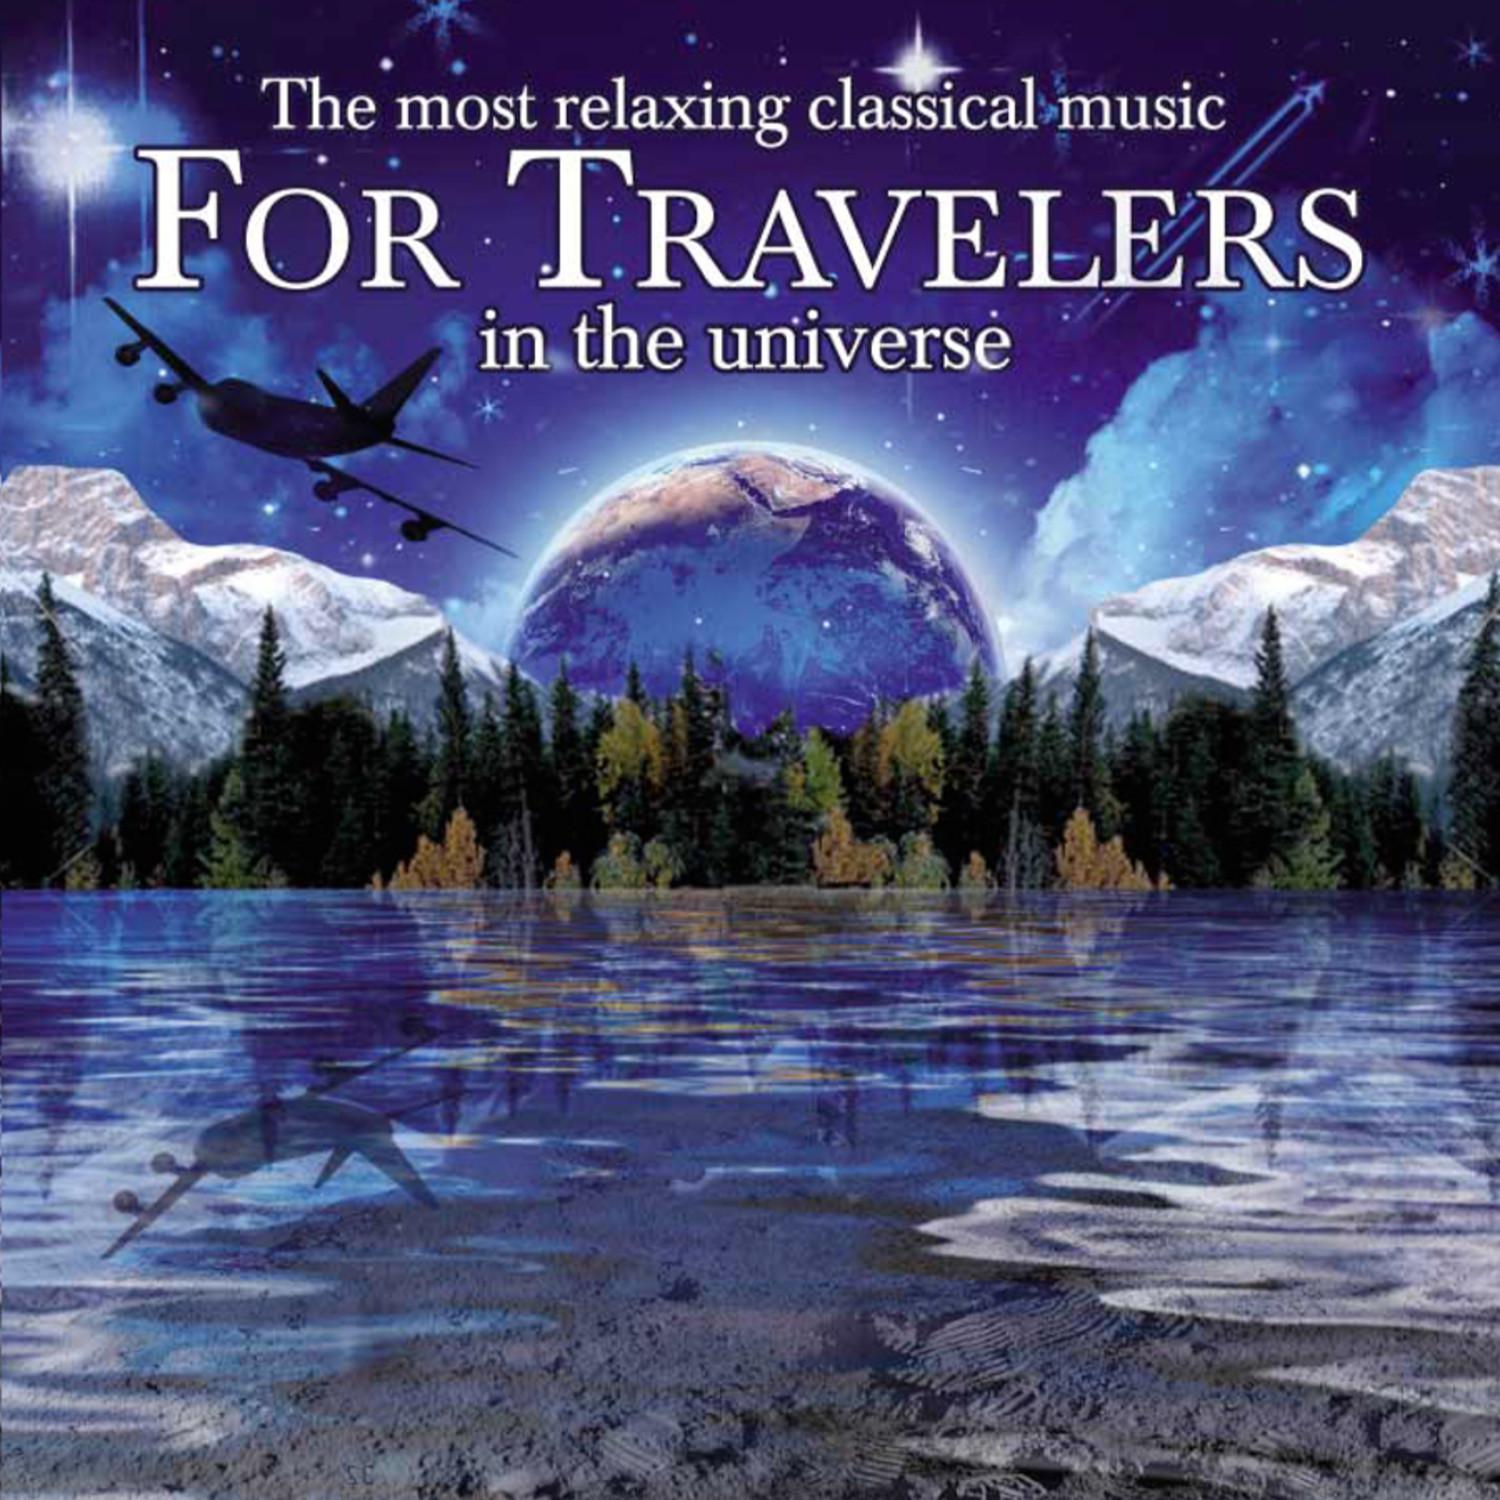 The Most Relaxing Classical Music for Travelers in the Universe